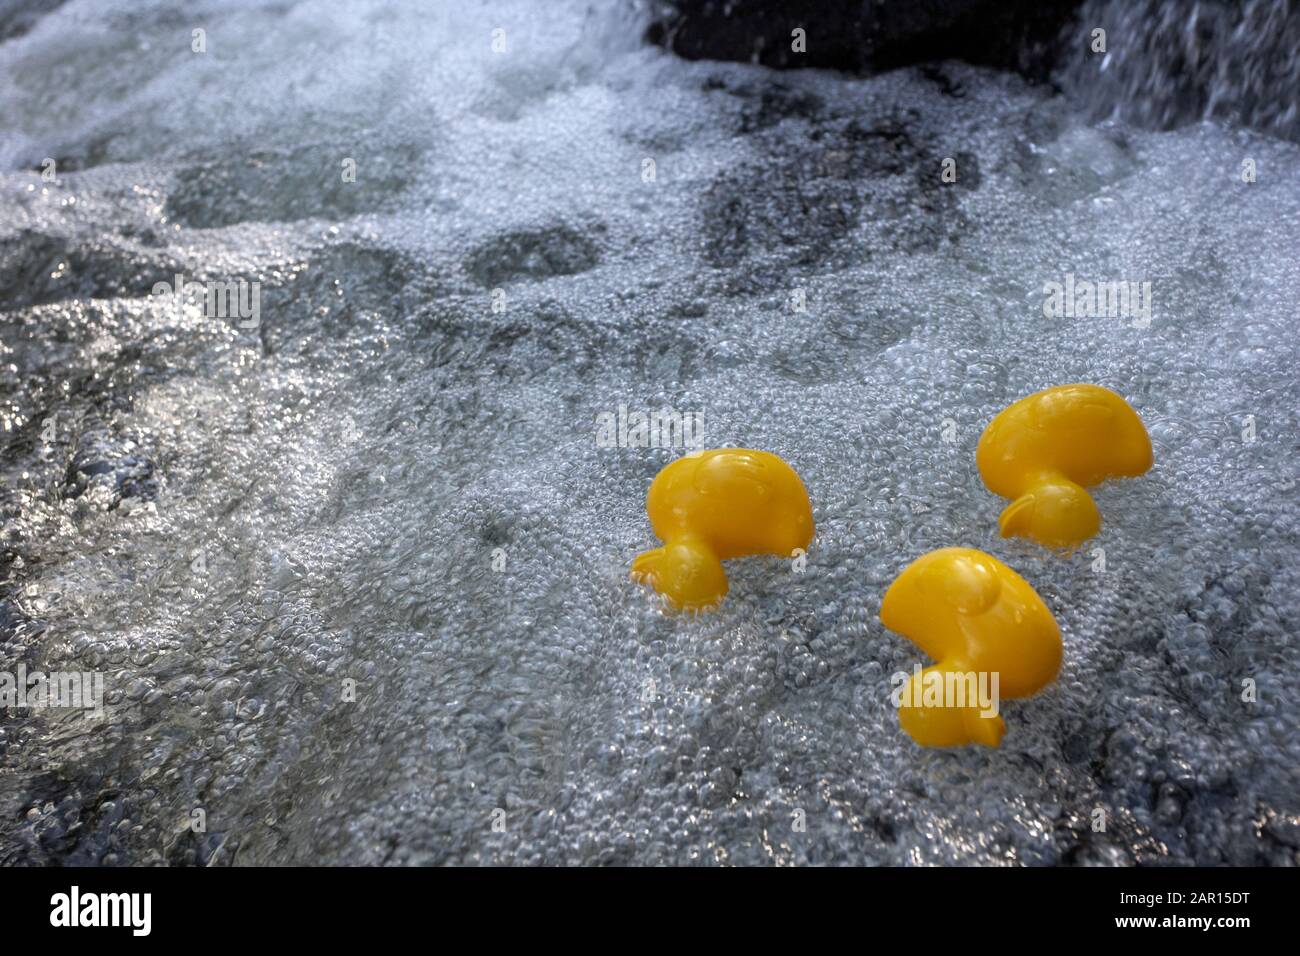 three yellow plastic ducks floating downstream overturned in a river in fast flowing clean water Stock Photo